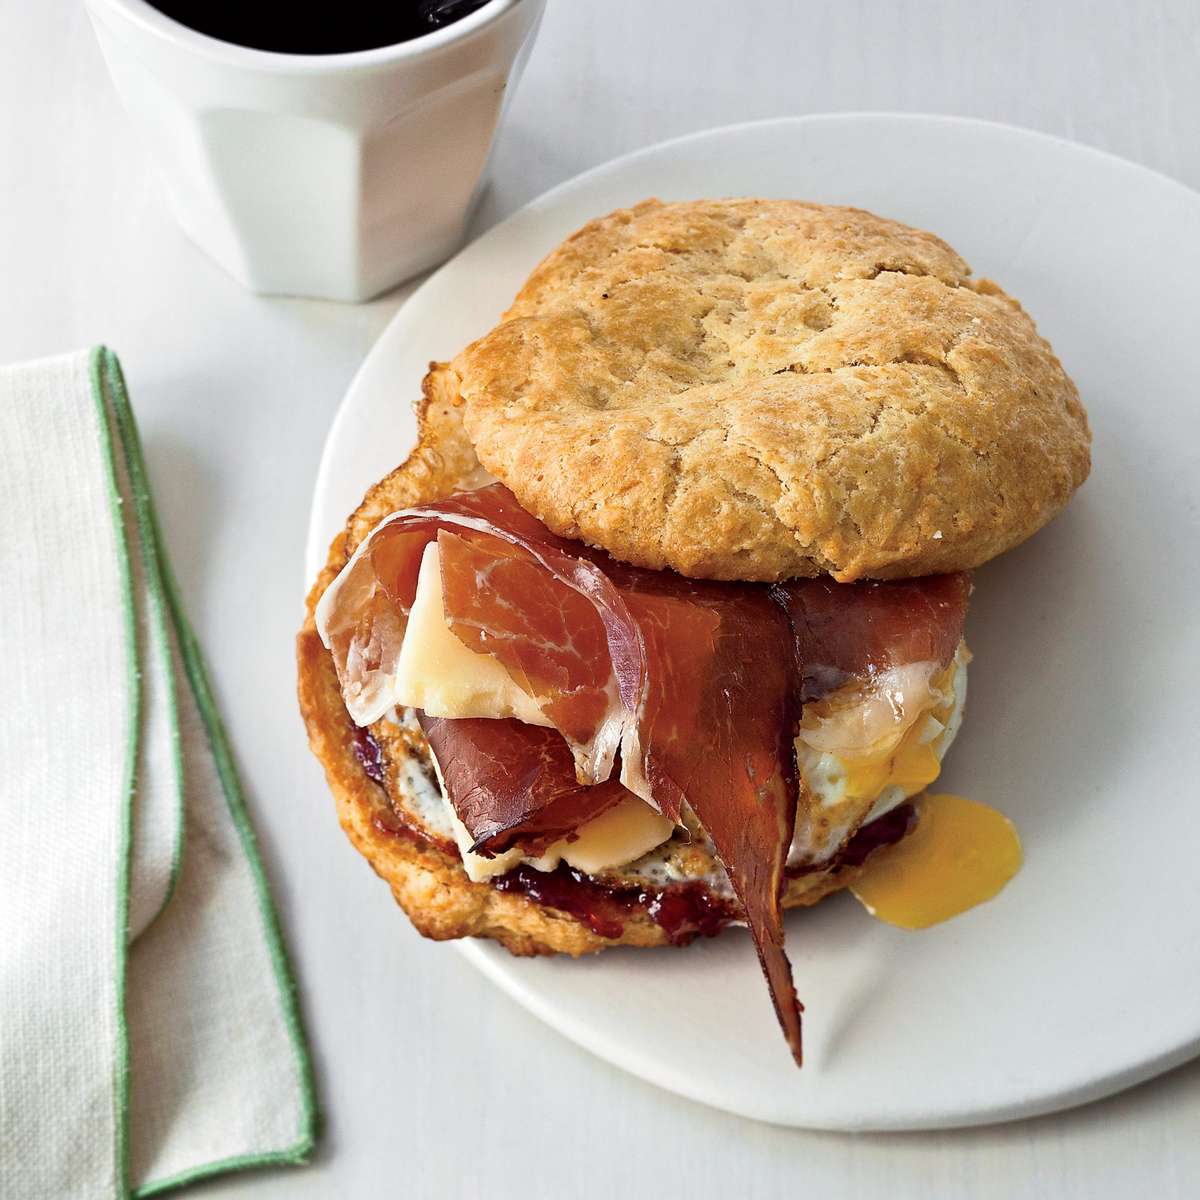 Breakfast Biscuit Sandwiches. Photo &copy; Quentin Bacon